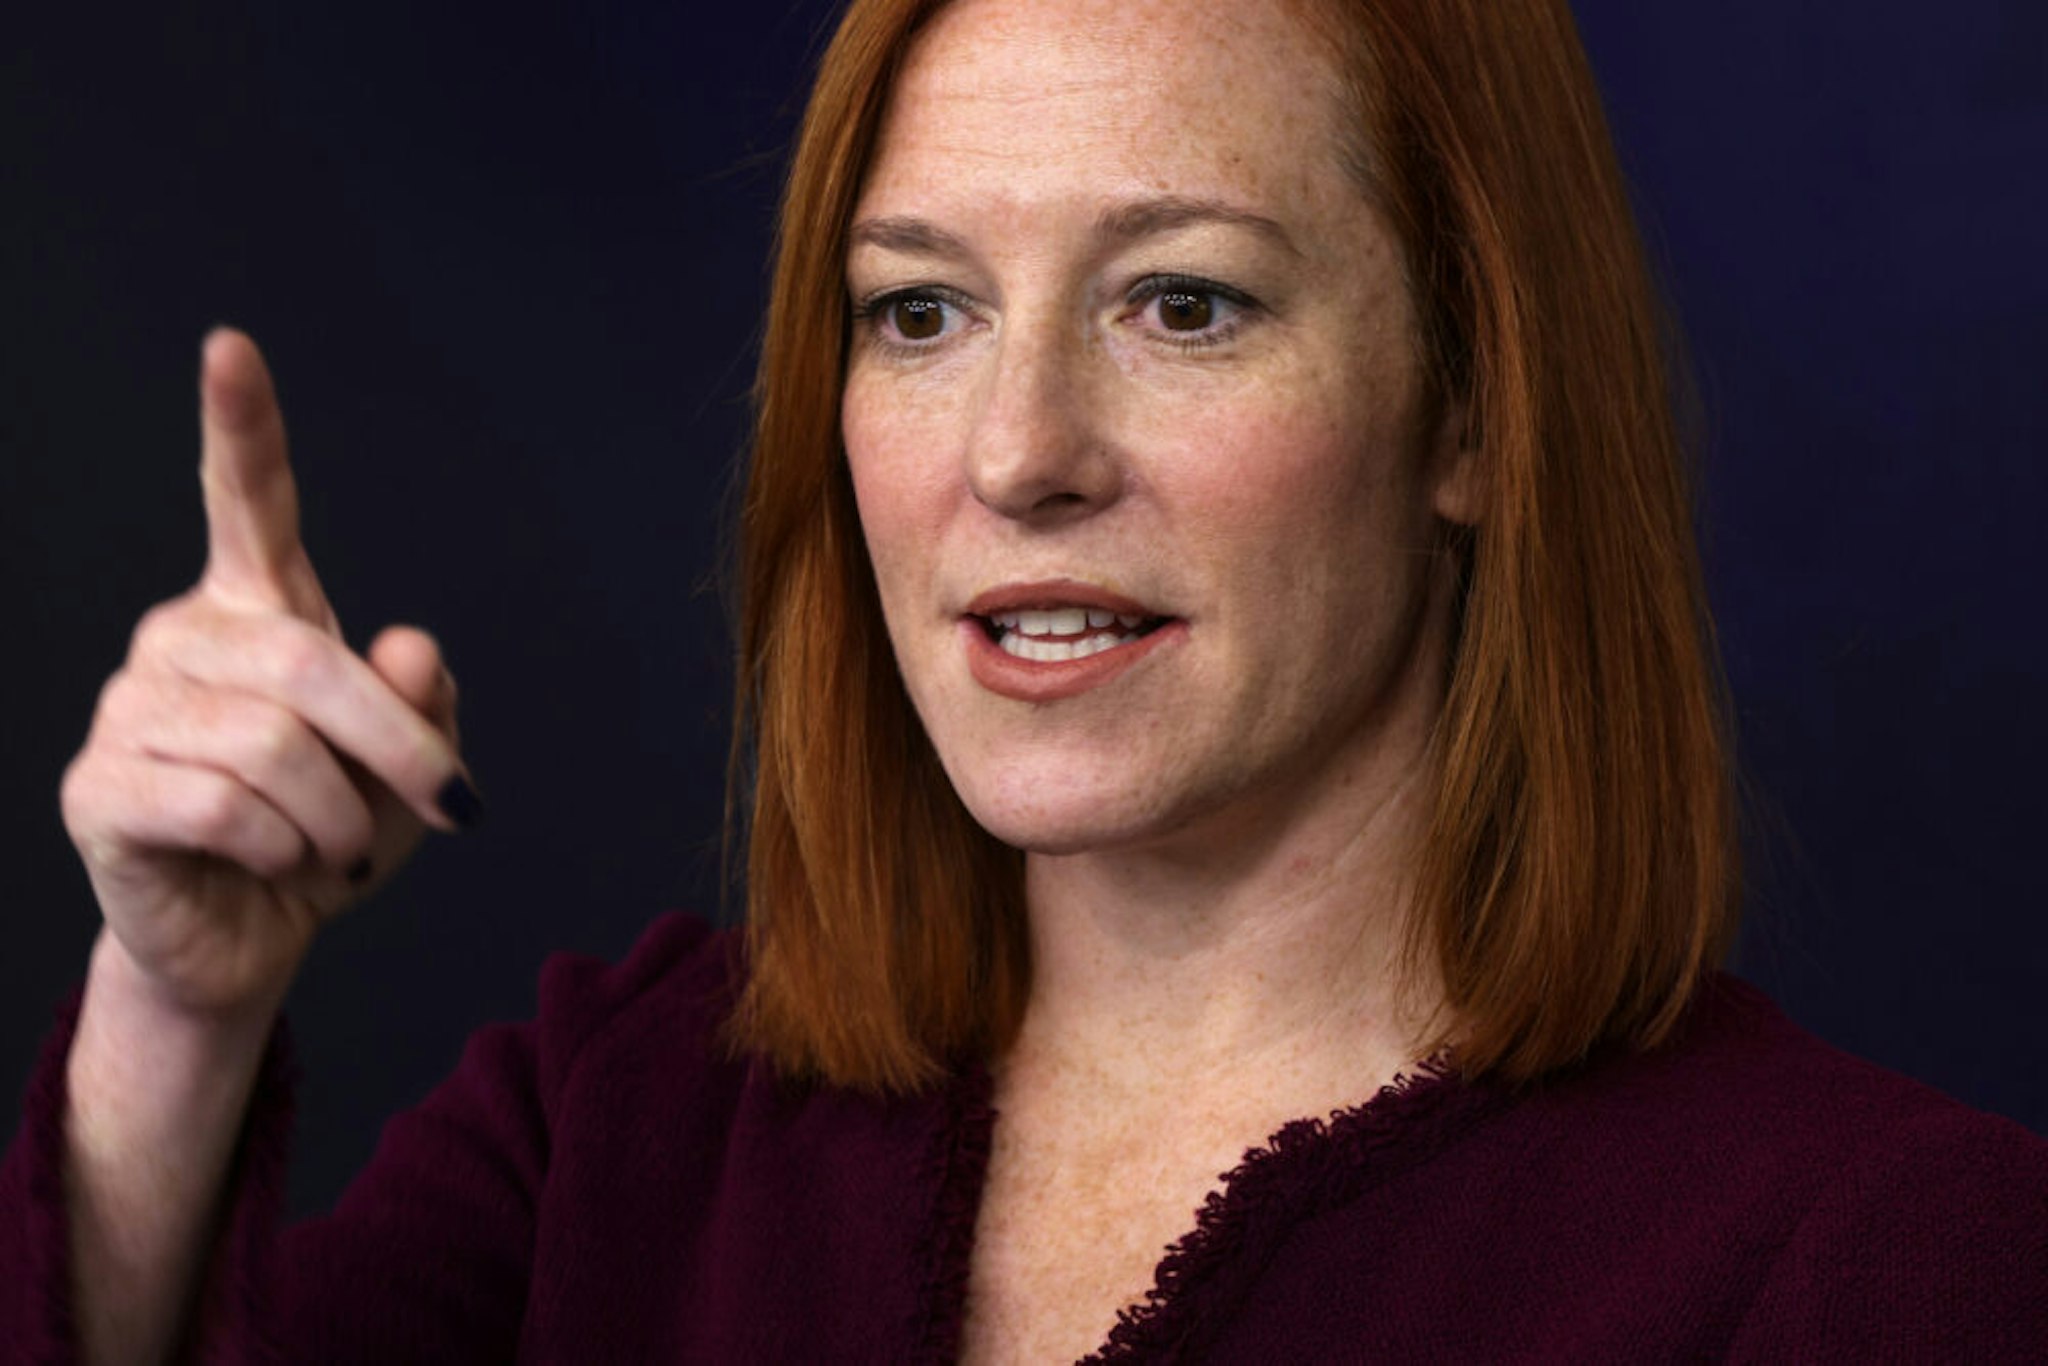 WASHINGTON, DC - FEBRUARY 09: White House Press Secretary Jen Psaki speaks during a news briefing at the James Brady Press Briefing Room of the White House February 9, 2021 in Washington, DC. Psaki held a news briefing to answers questions from the members of the press.